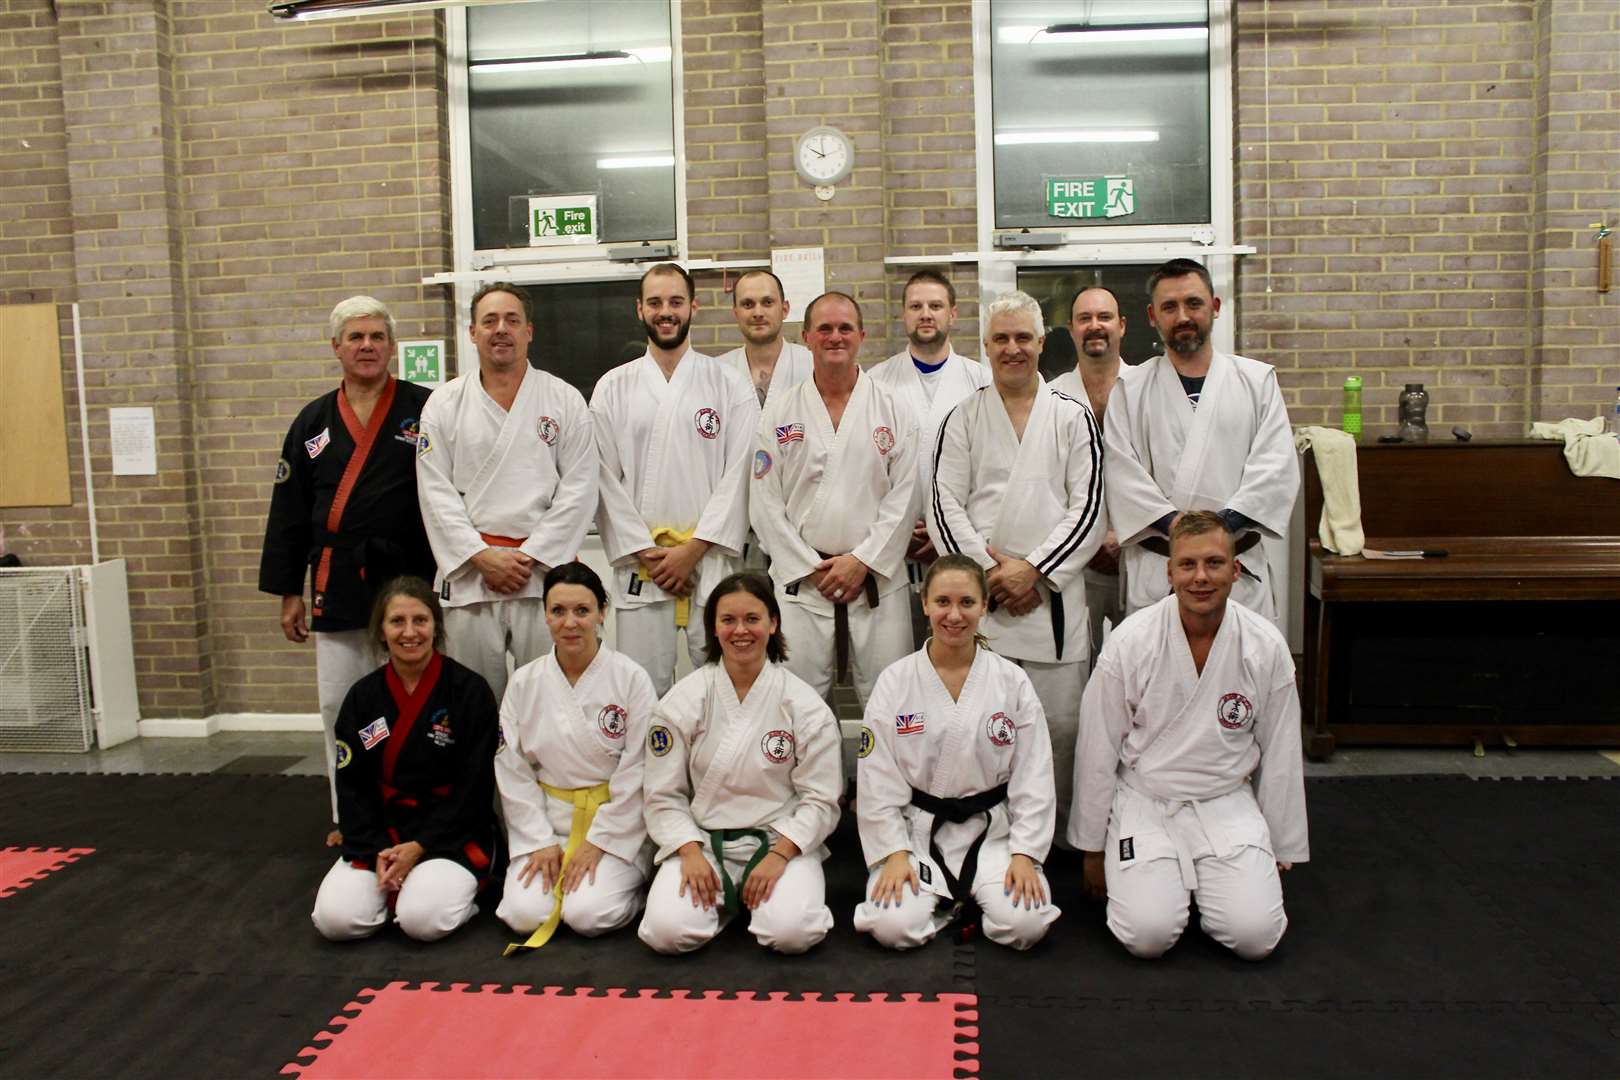 North Kent Ju-Jitsu Kai, based in Gravesend, have tried to get classes restarted. Picture taken before the outbreak of Covid-19. Picture: Trudi Kitchener